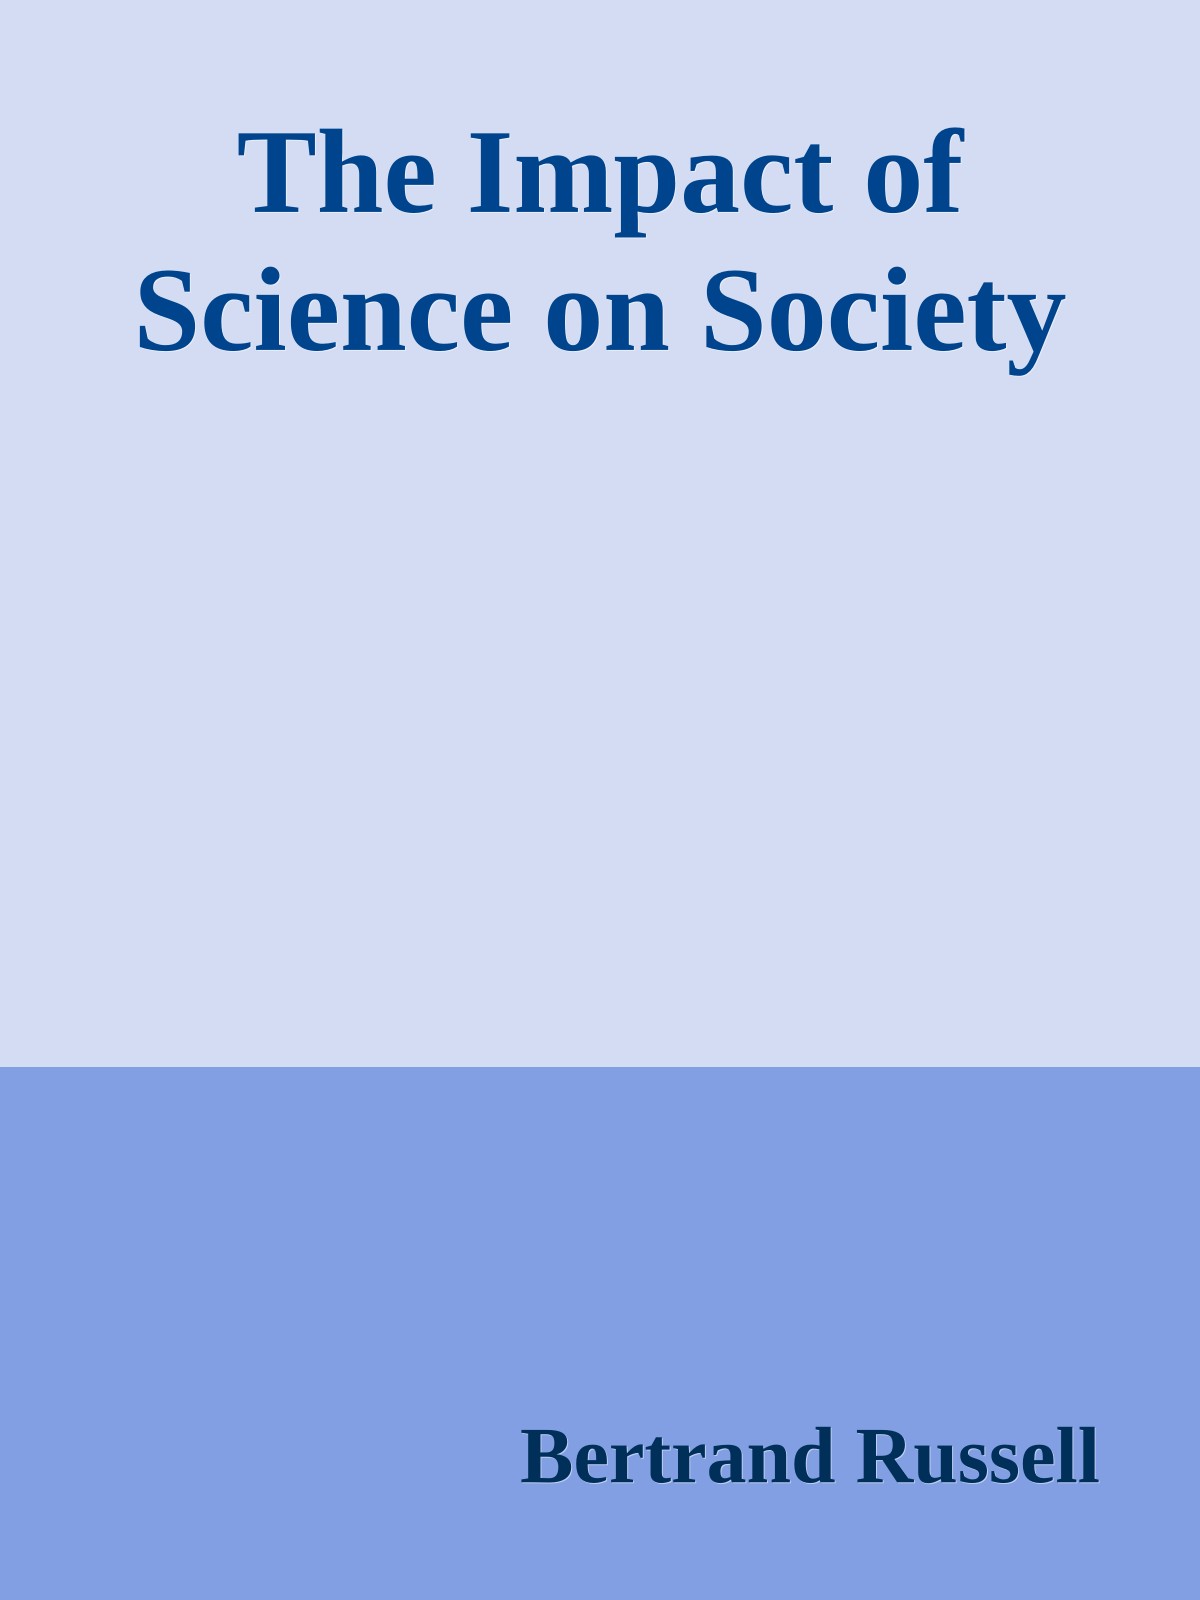 The Impact of Science on Society (1953) by Bertrand Russell